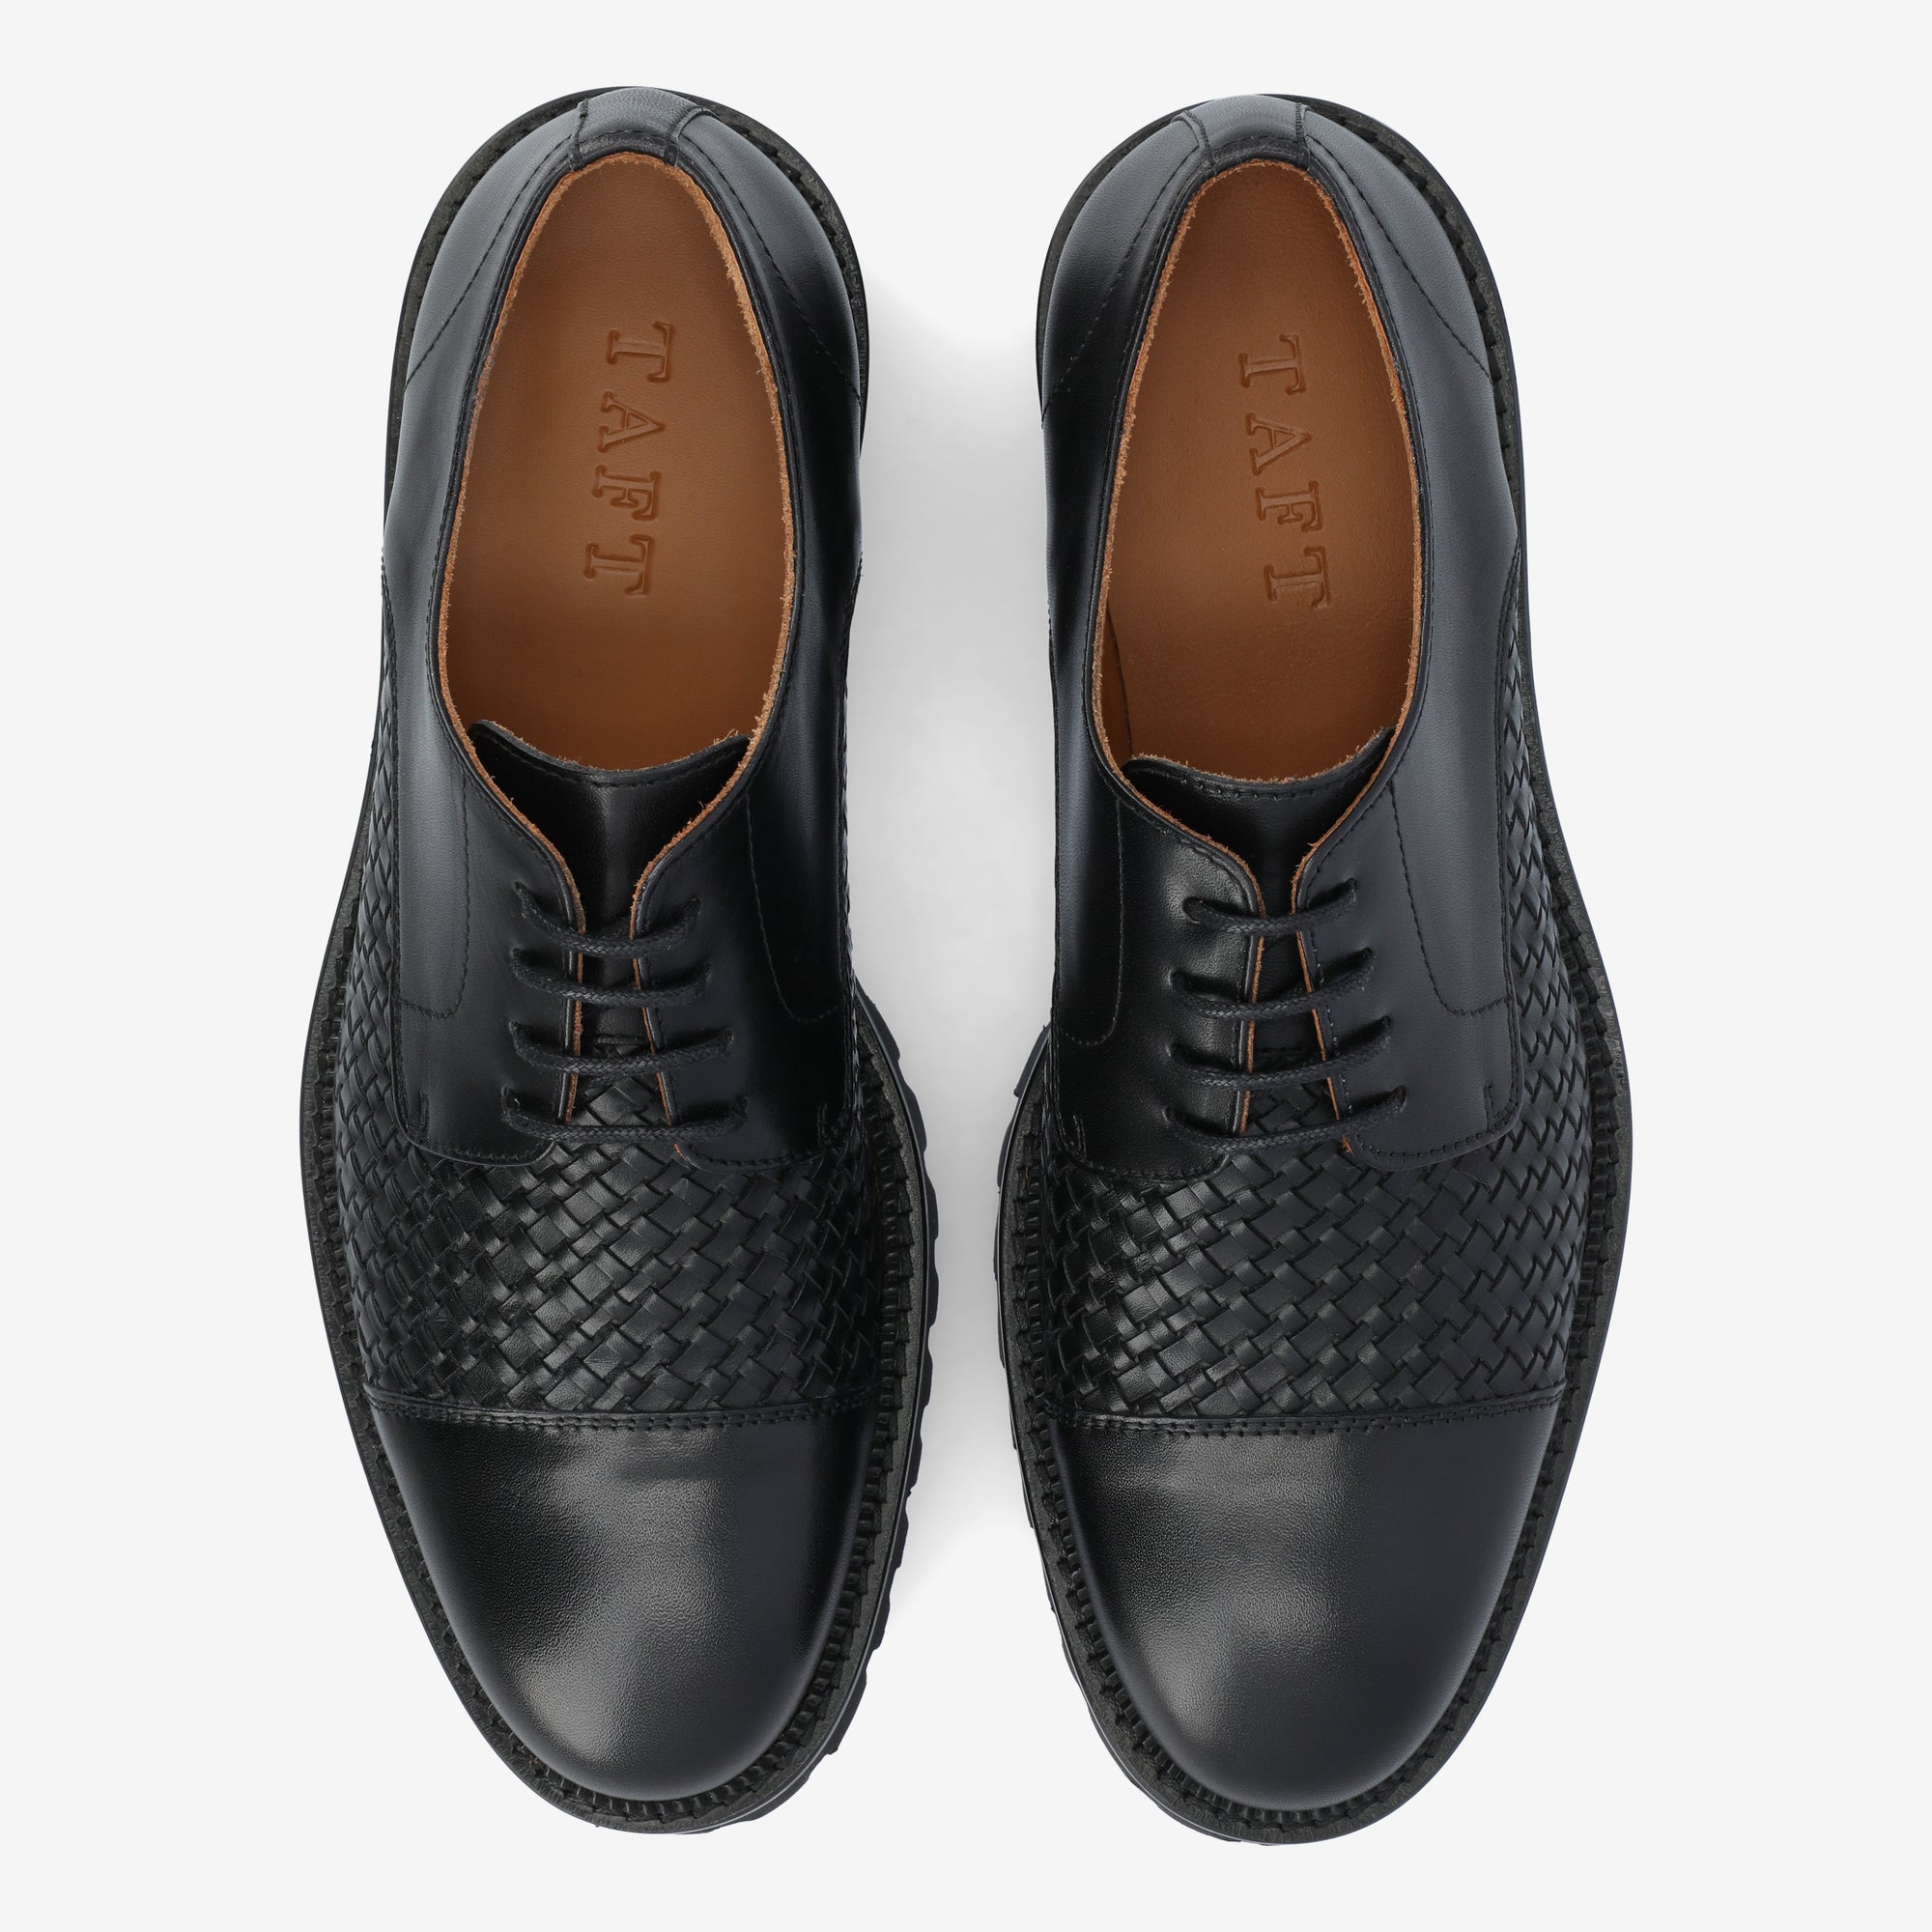 The Lucia Shoe in Black Woven